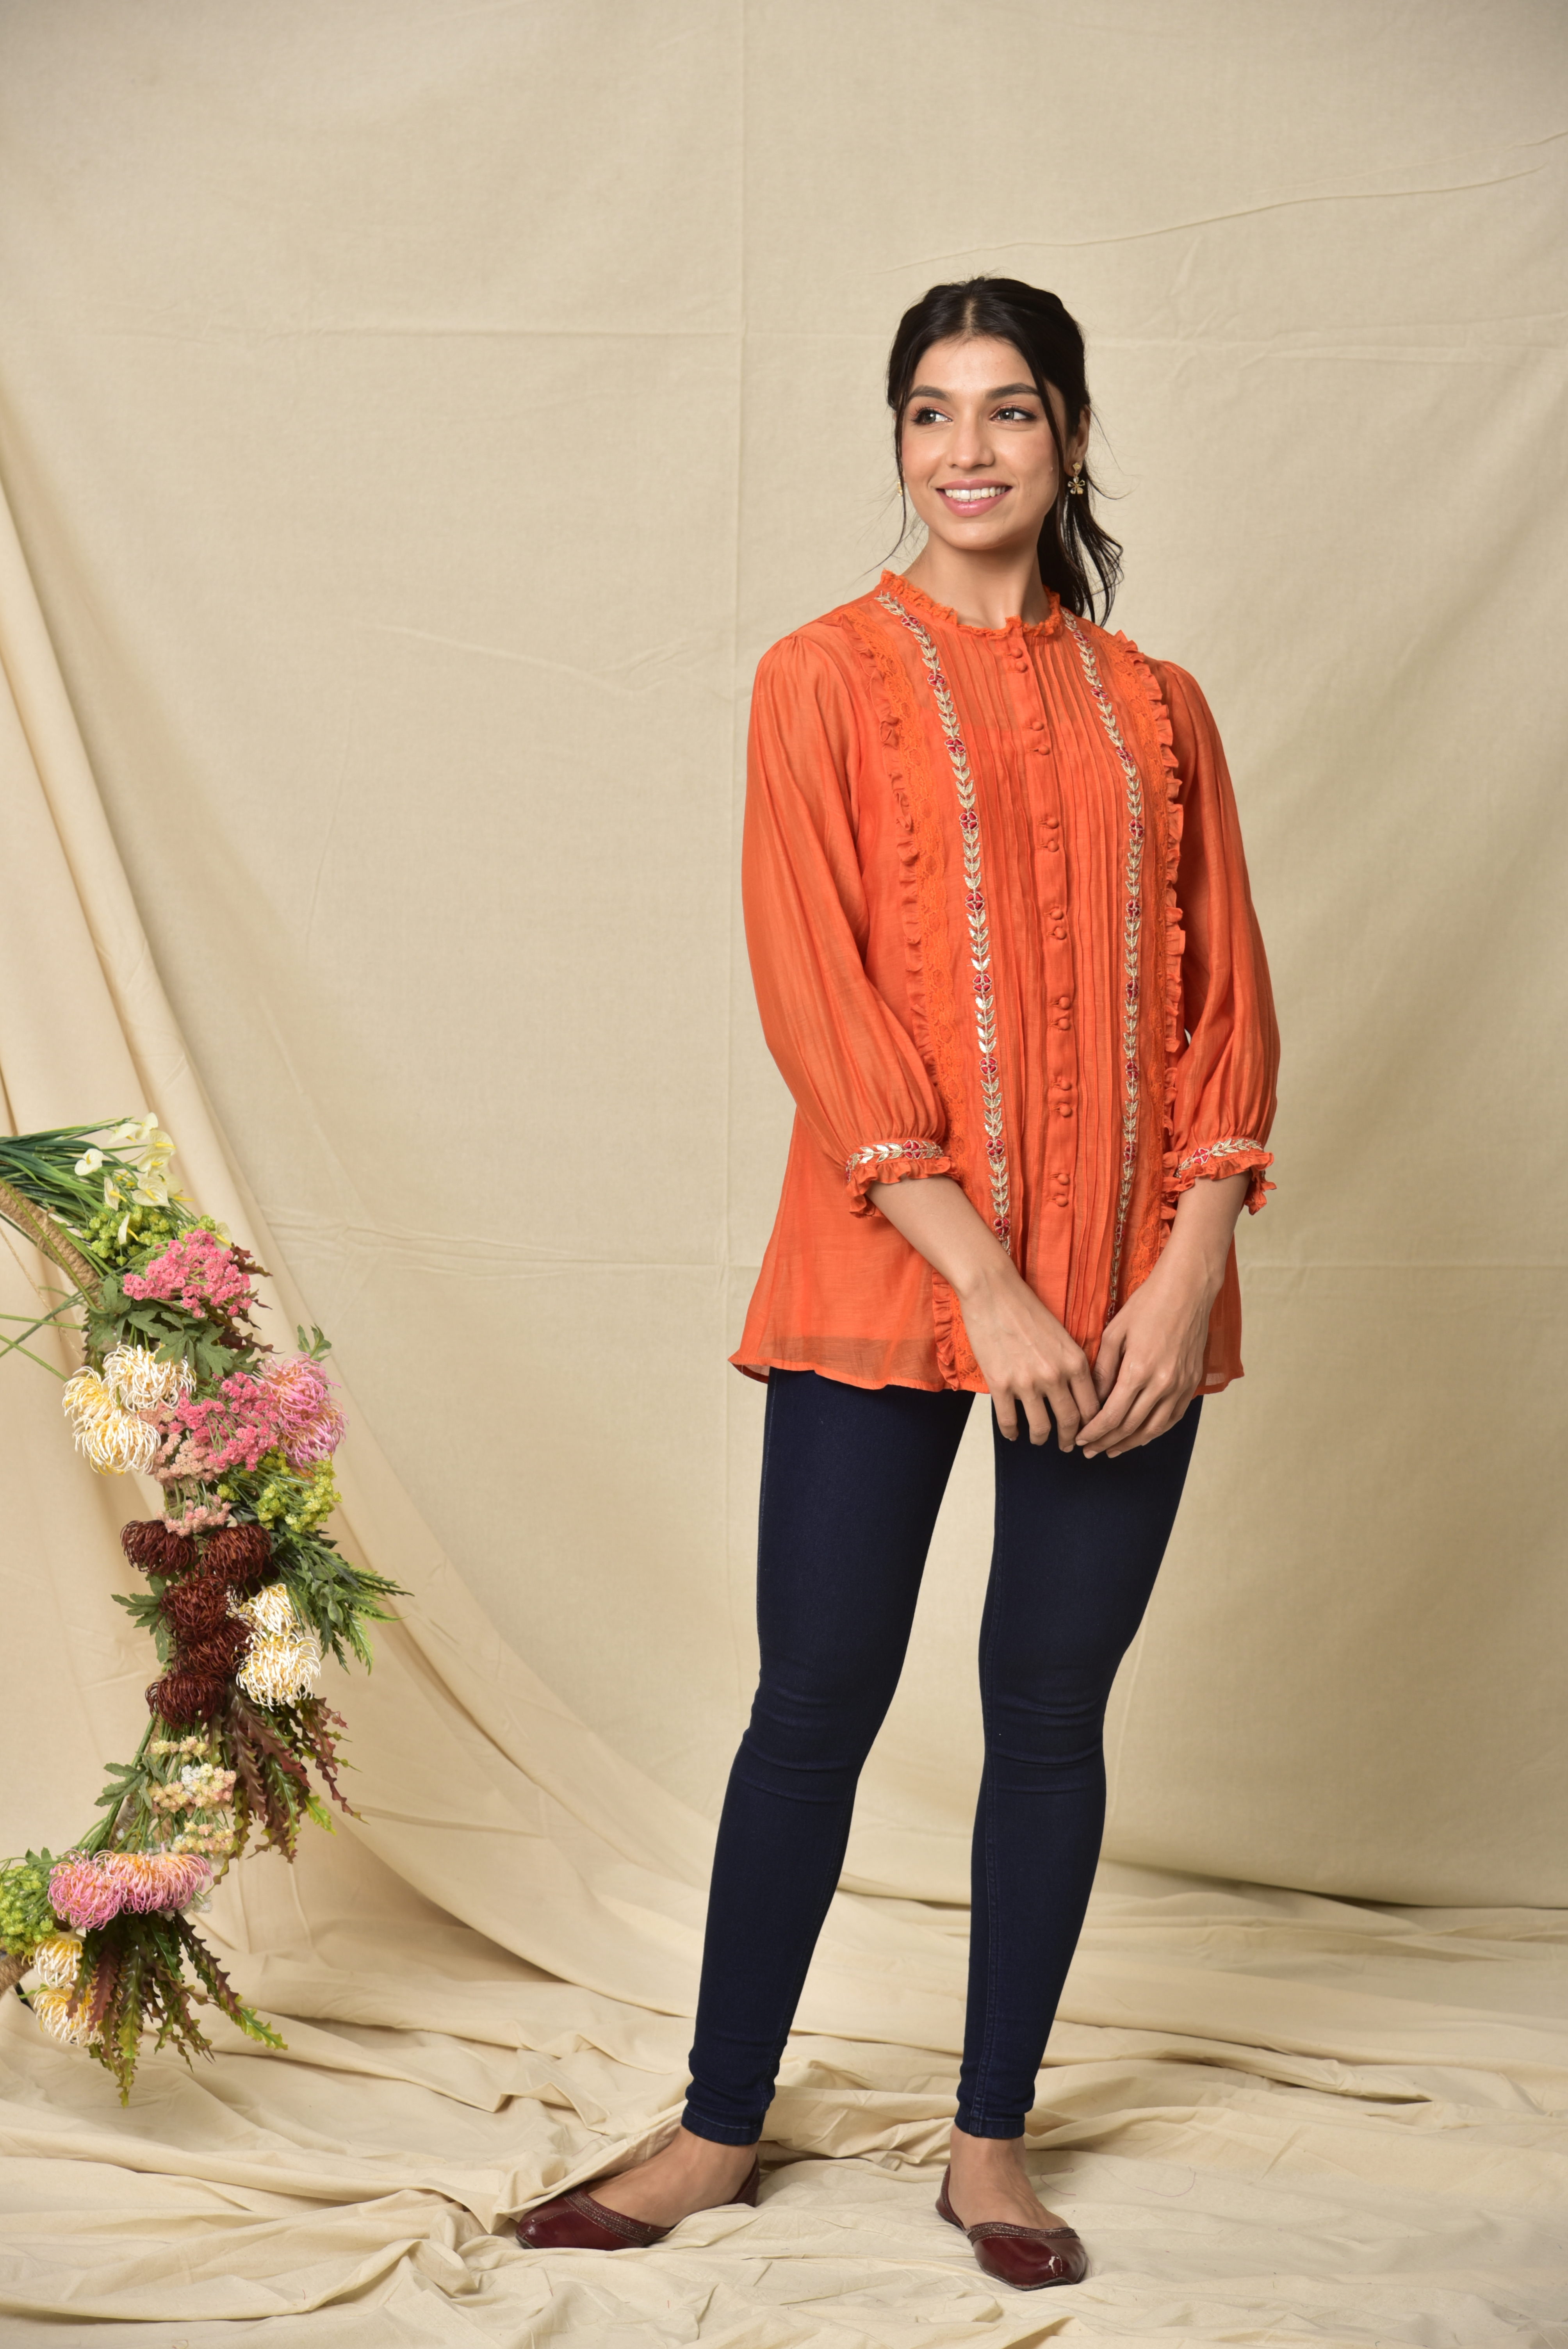 KAARAH BY KAAVYA | Orange Chanderi Lace Top With Gota Border on Both Side undefined